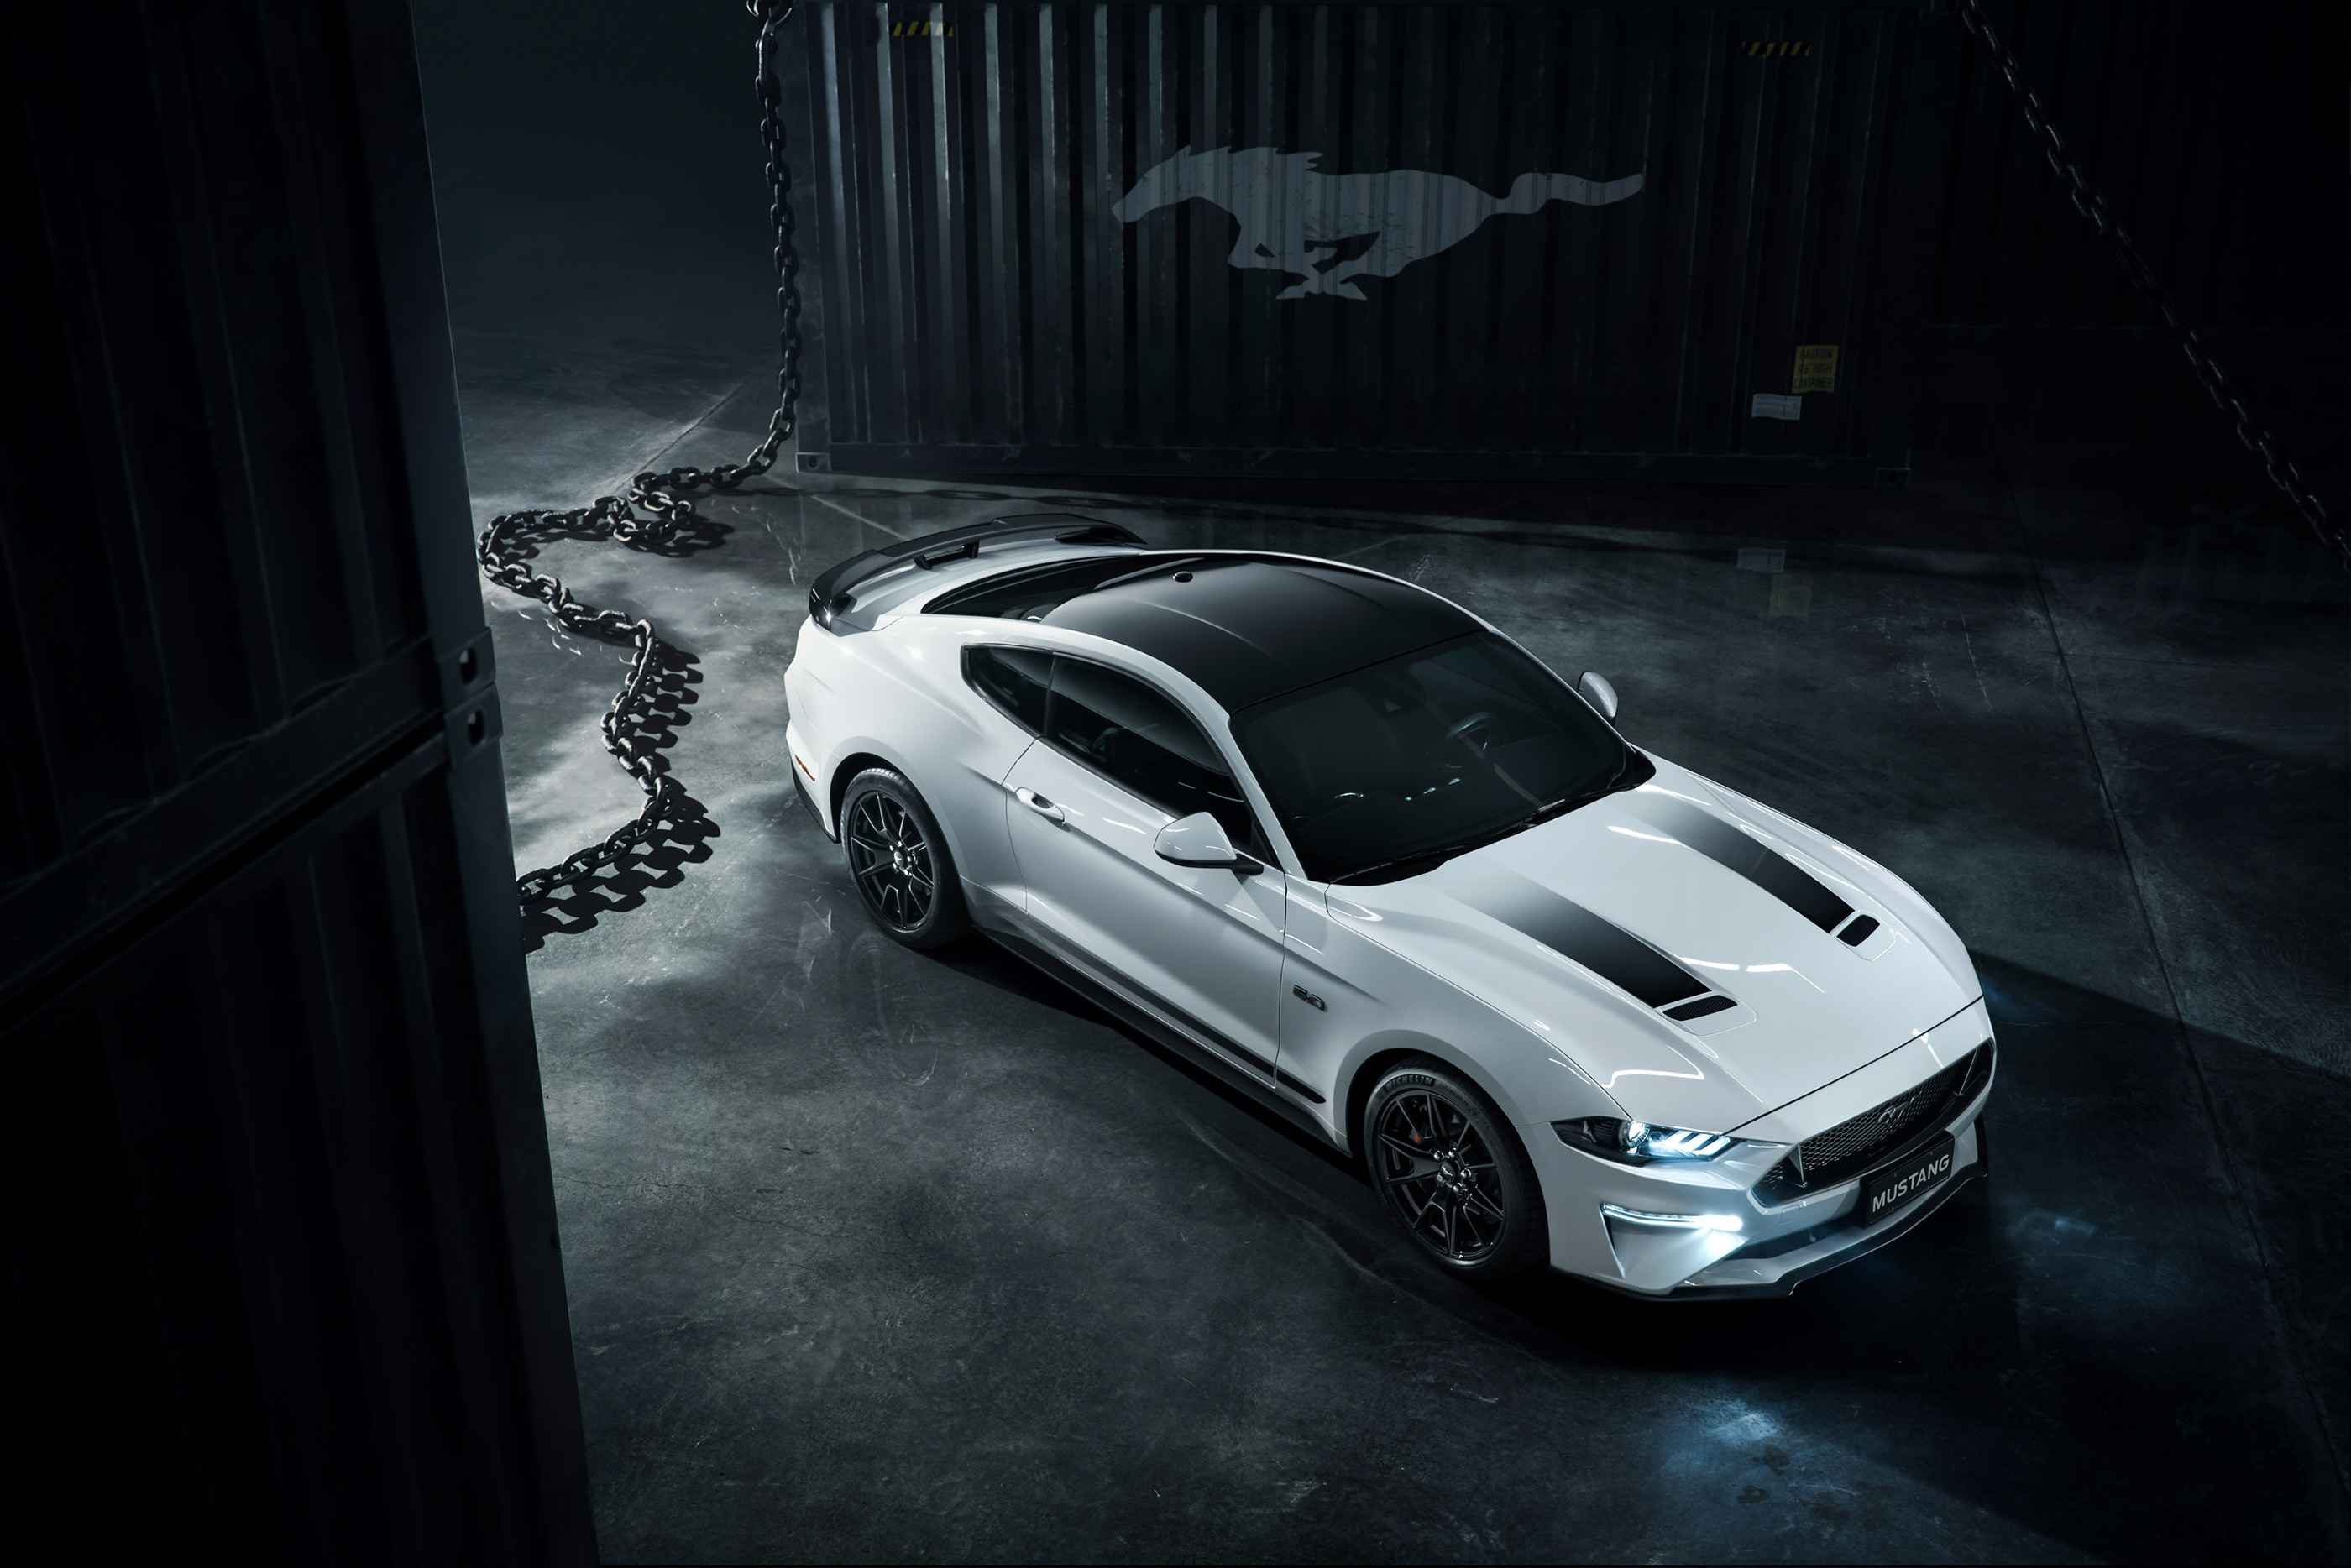 A white Ford Mustang in the dark.